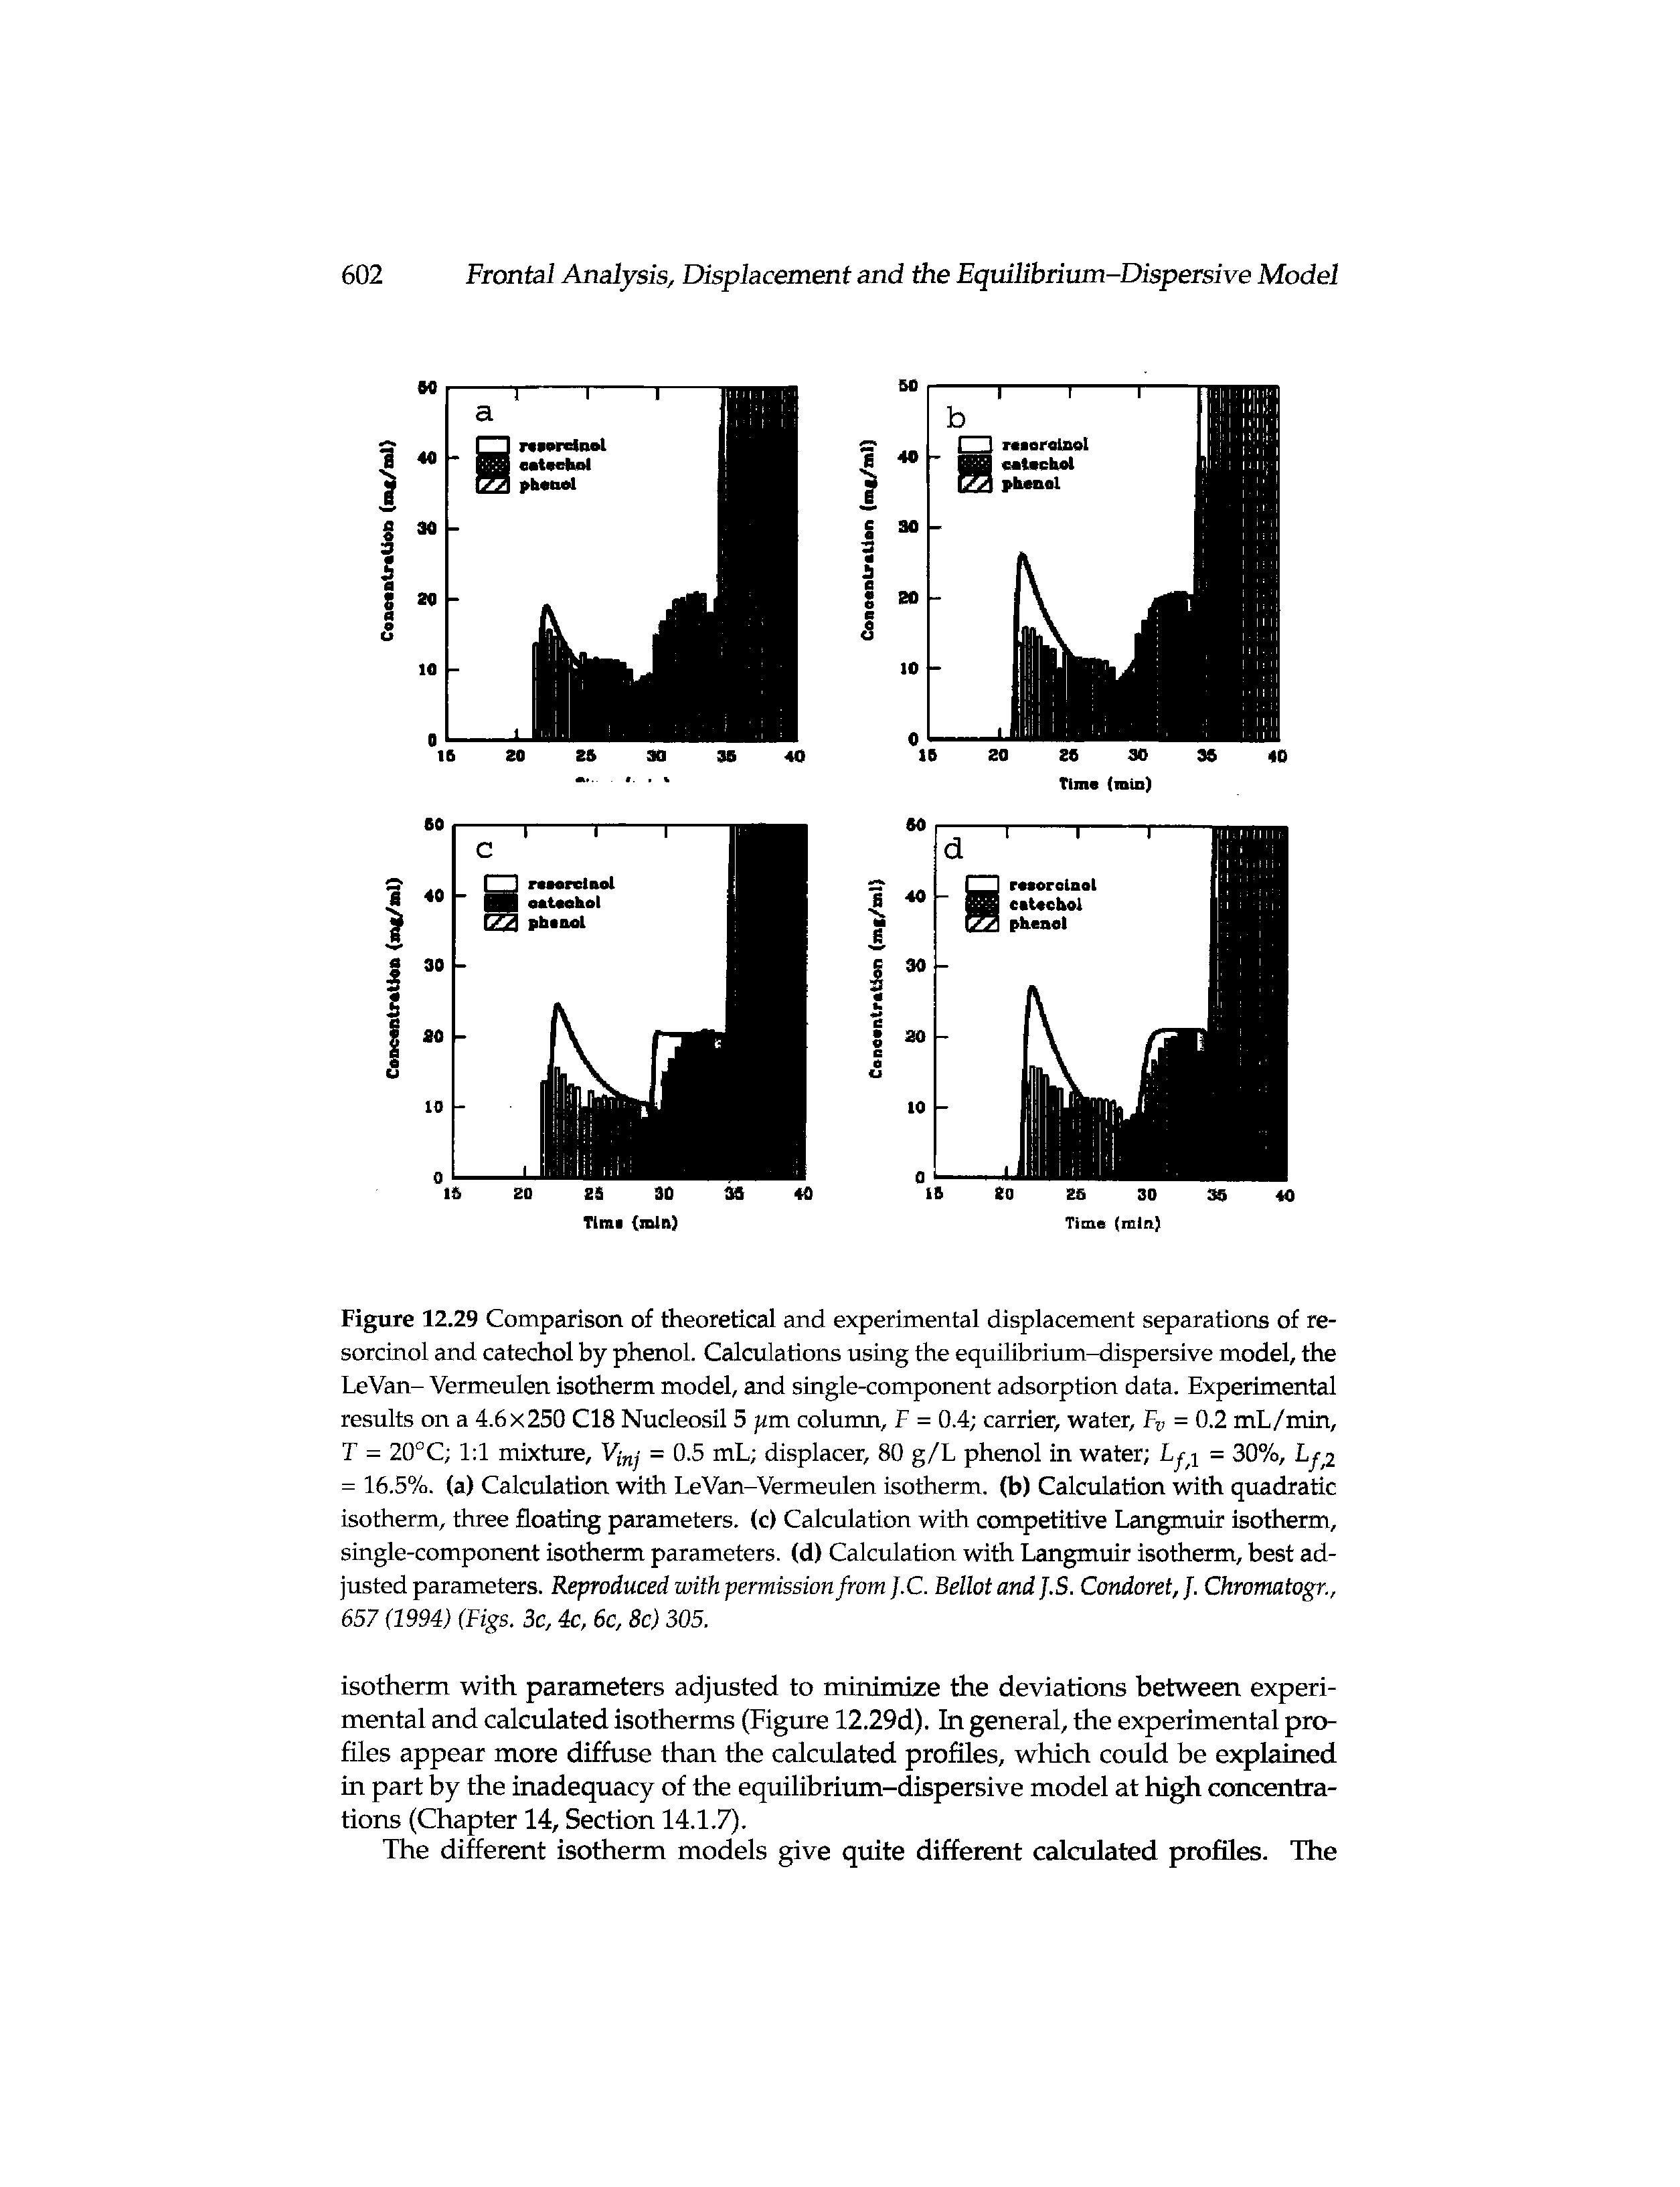 Figure 12.29 Comparison of theoretical and experimental displacement separations of resorcinol and catechol by phenol. Calculations using the equilibrium-dispersive model, the LeVan- Vermeulen isotherm model, and single-component adsorption data. Experimental results on a 4.6x250 CIS Nucleosil 5 fim column, F = 0.4 carrier, water, Fj, = 0.2 mL/min, T = 20°C 1 1 mixture, = 0.5 mL displacer, 80 g/L phenol in water = 30%, Lf = 16.5%. (a) Calculation with LeVan-Vermeulen isotherm, (b) Calculation with quadratic isotherm, three floating parameters, (c) Calculation with competitive Langmuir isotherm, single-component isotherm parameters, (d) Calculation with Langmuir isotherm, best adjusted parameters. Reproduced with permission from. C. Bellot and J.S. Condoret, J. Chromatogr., 657 (1994) (Figs. 3c, 4c, 6c, 8c) 305.